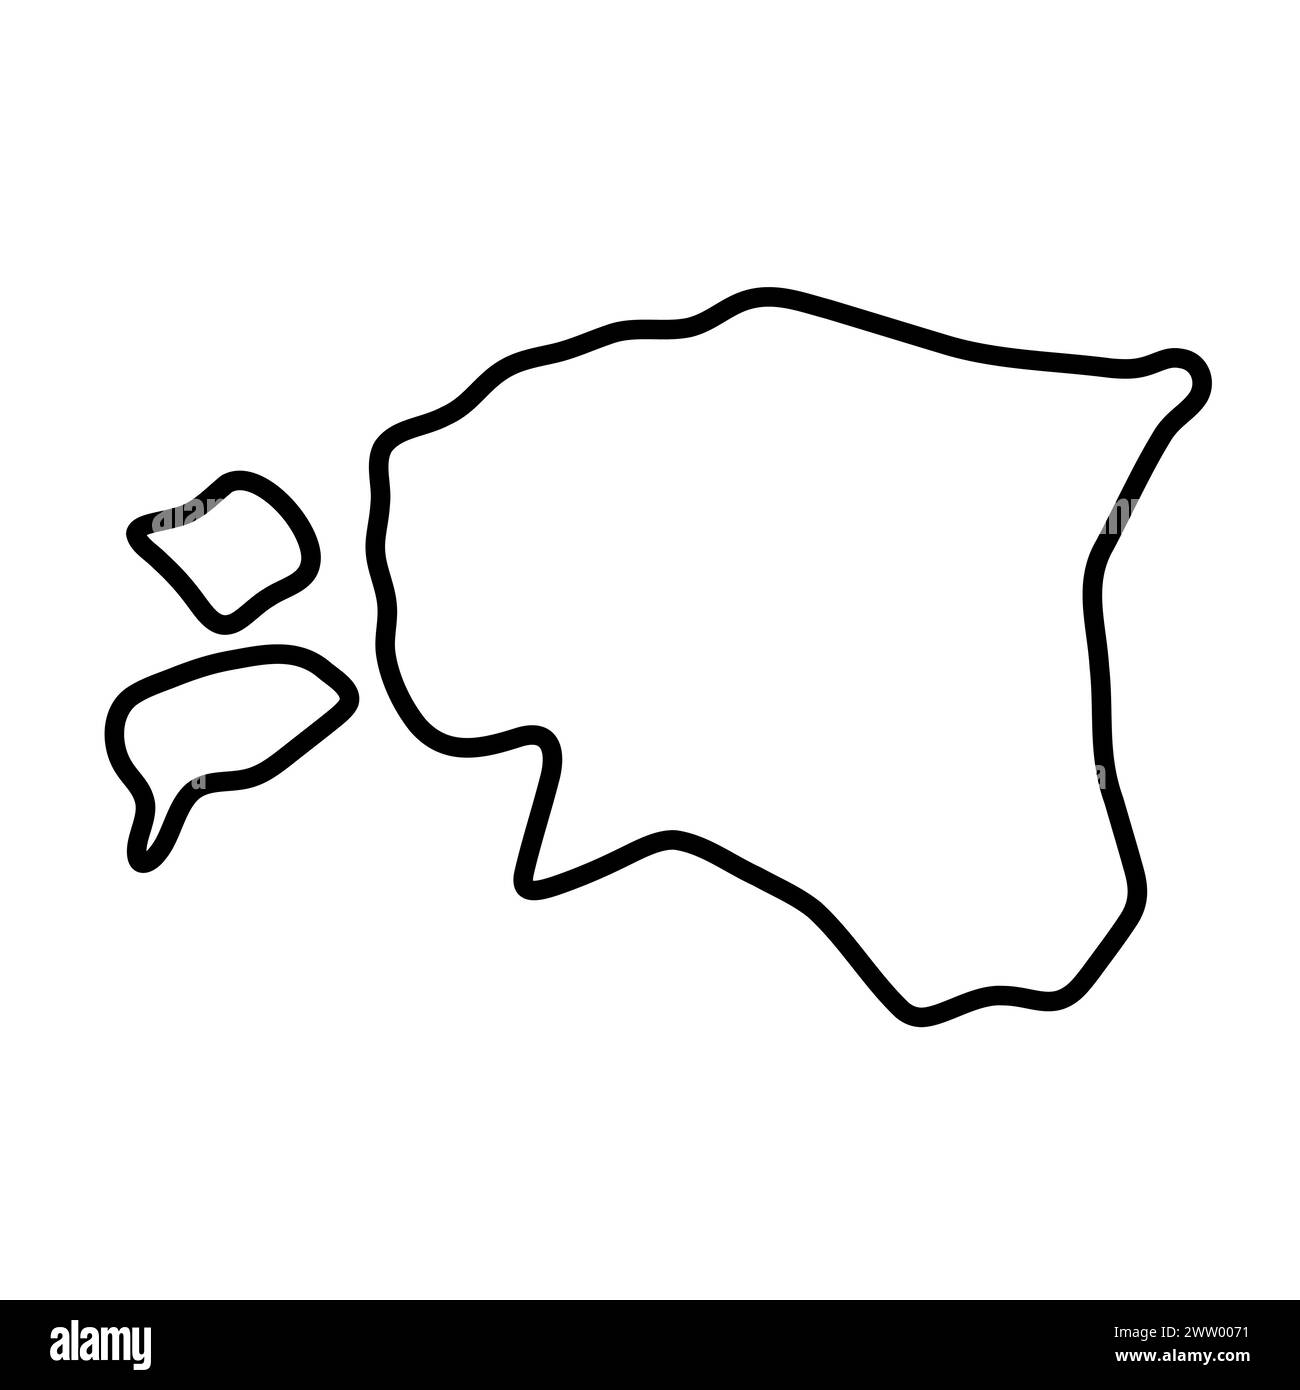 Estonia country simplified map. Thick black outline contour. Simple vector icon Stock Vector